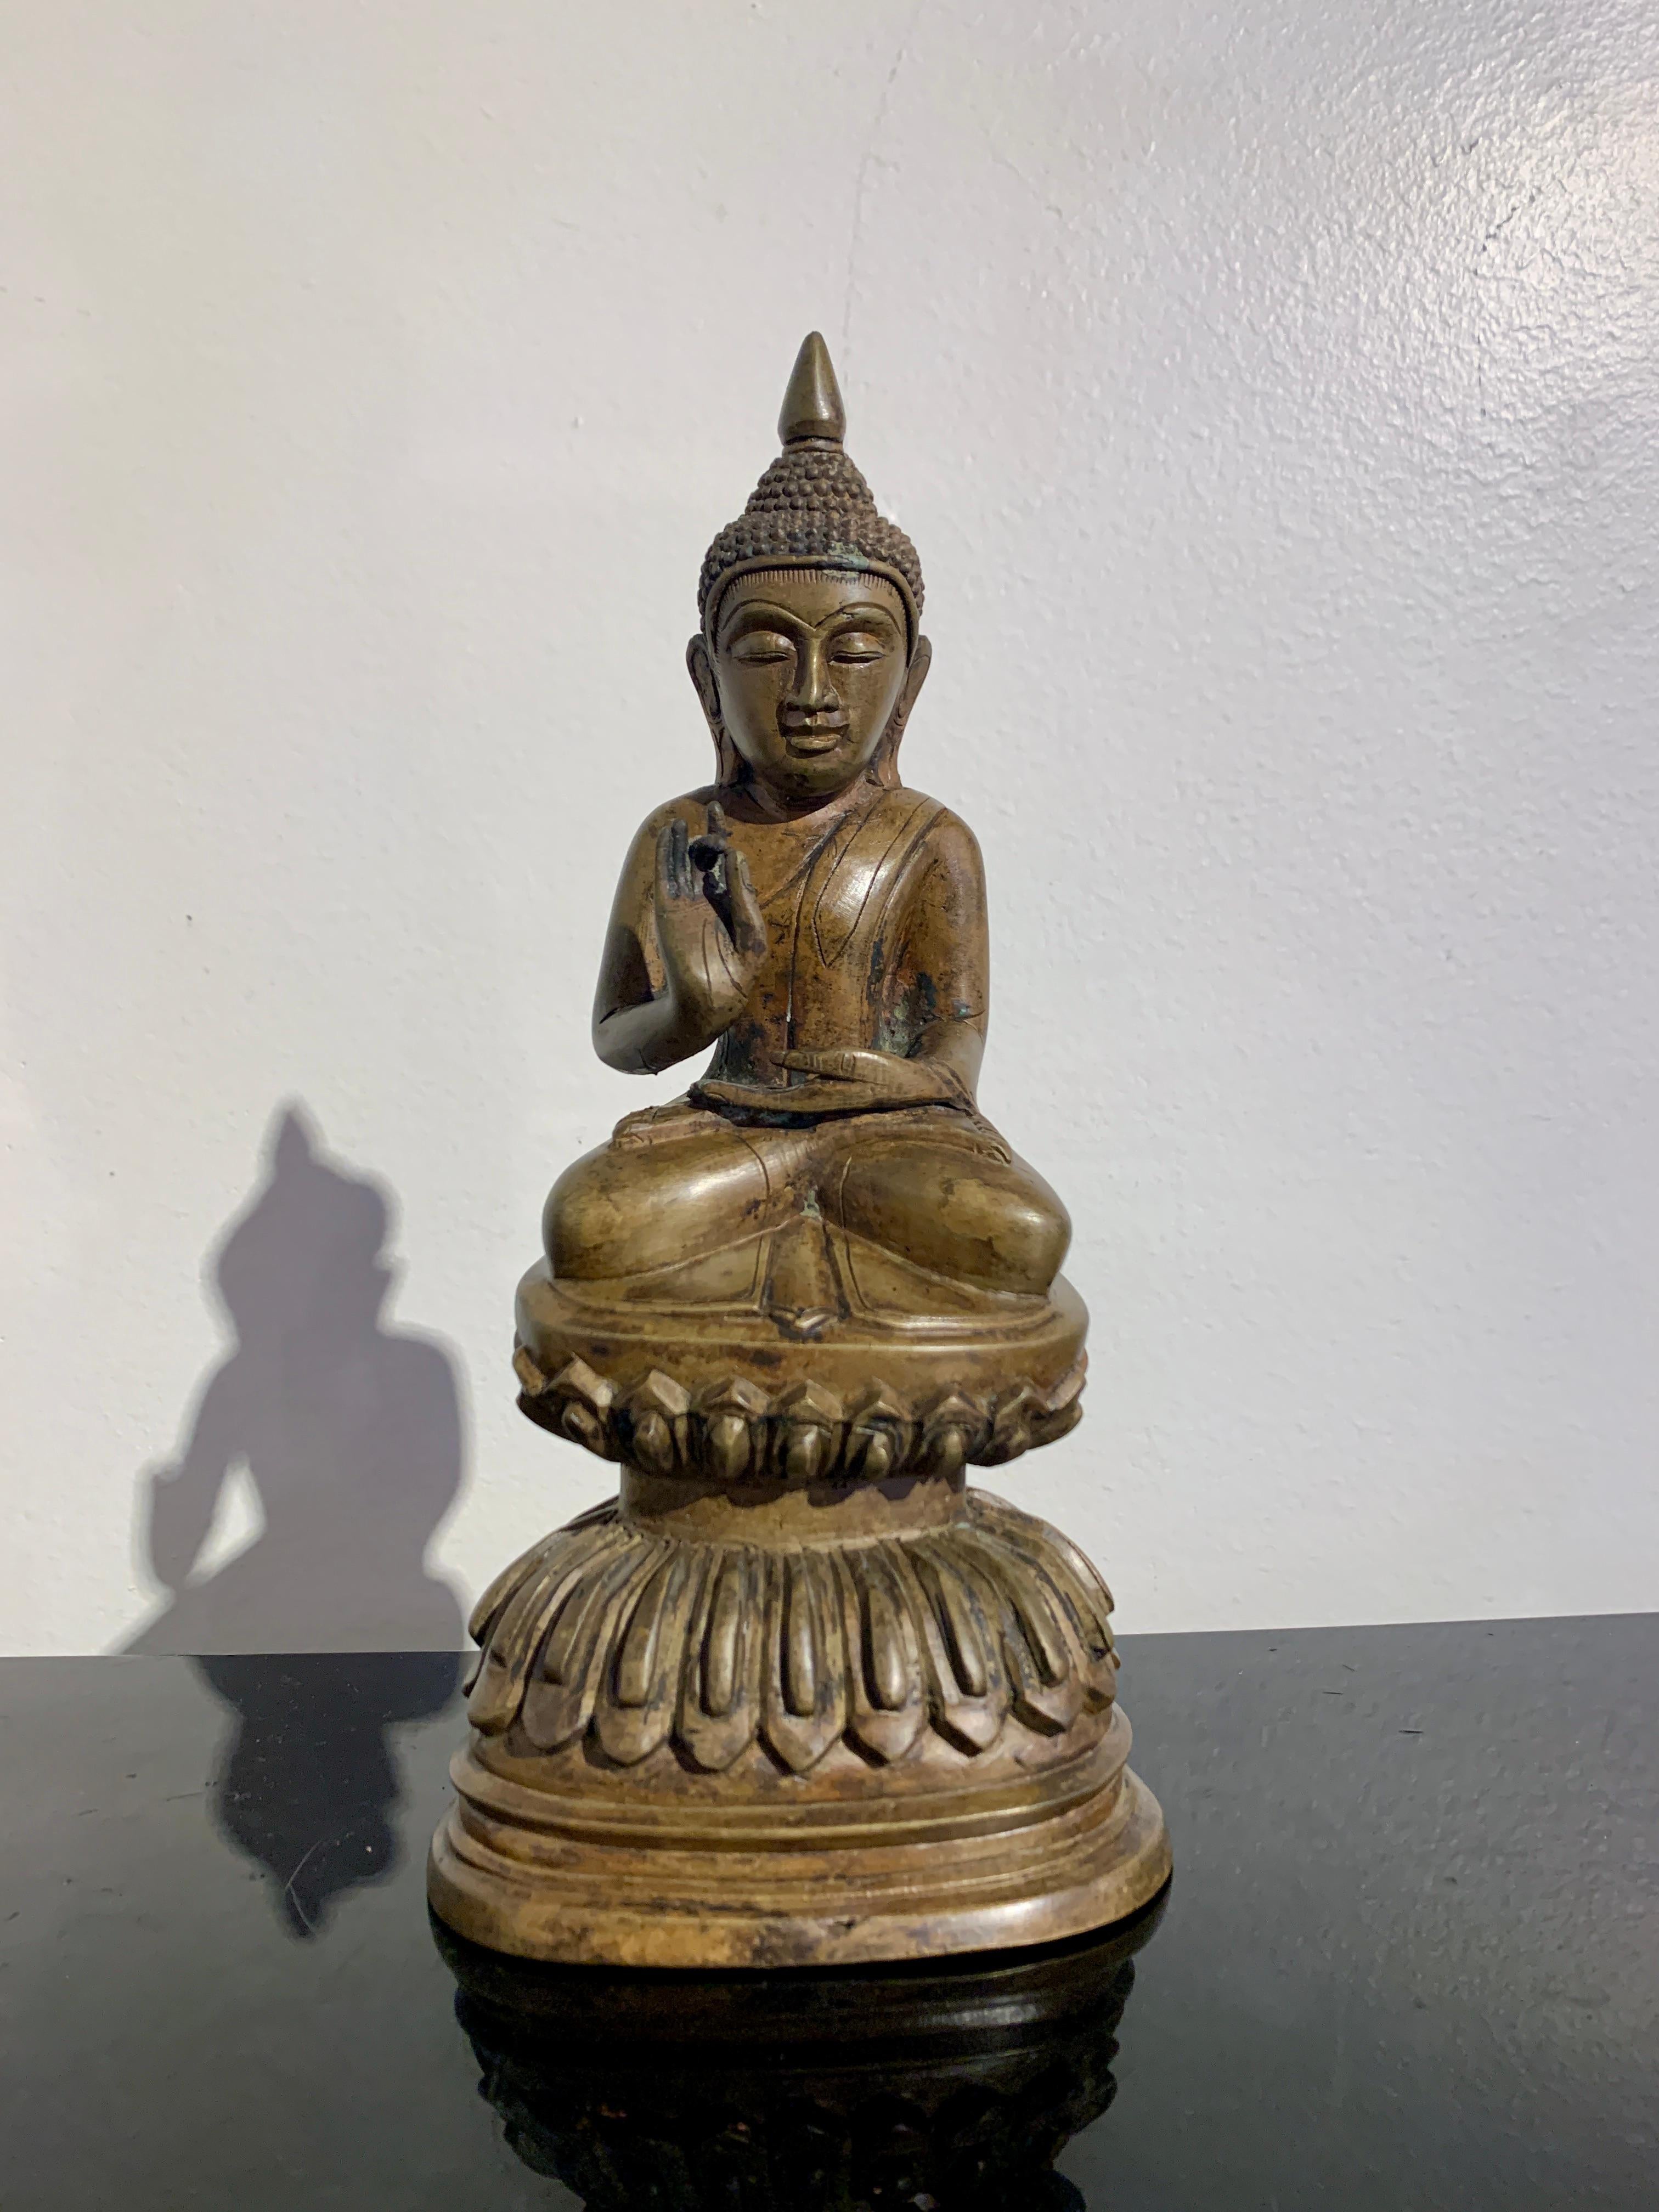 A delightful Shan Burmese cast bronze seated Buddha in the Ava style, late 19th or early 20th century, Burma.

The Buddha sits upon a high, well cast double lotus pedestal. He is seated pitched forward in the full lotus position, the soles of his